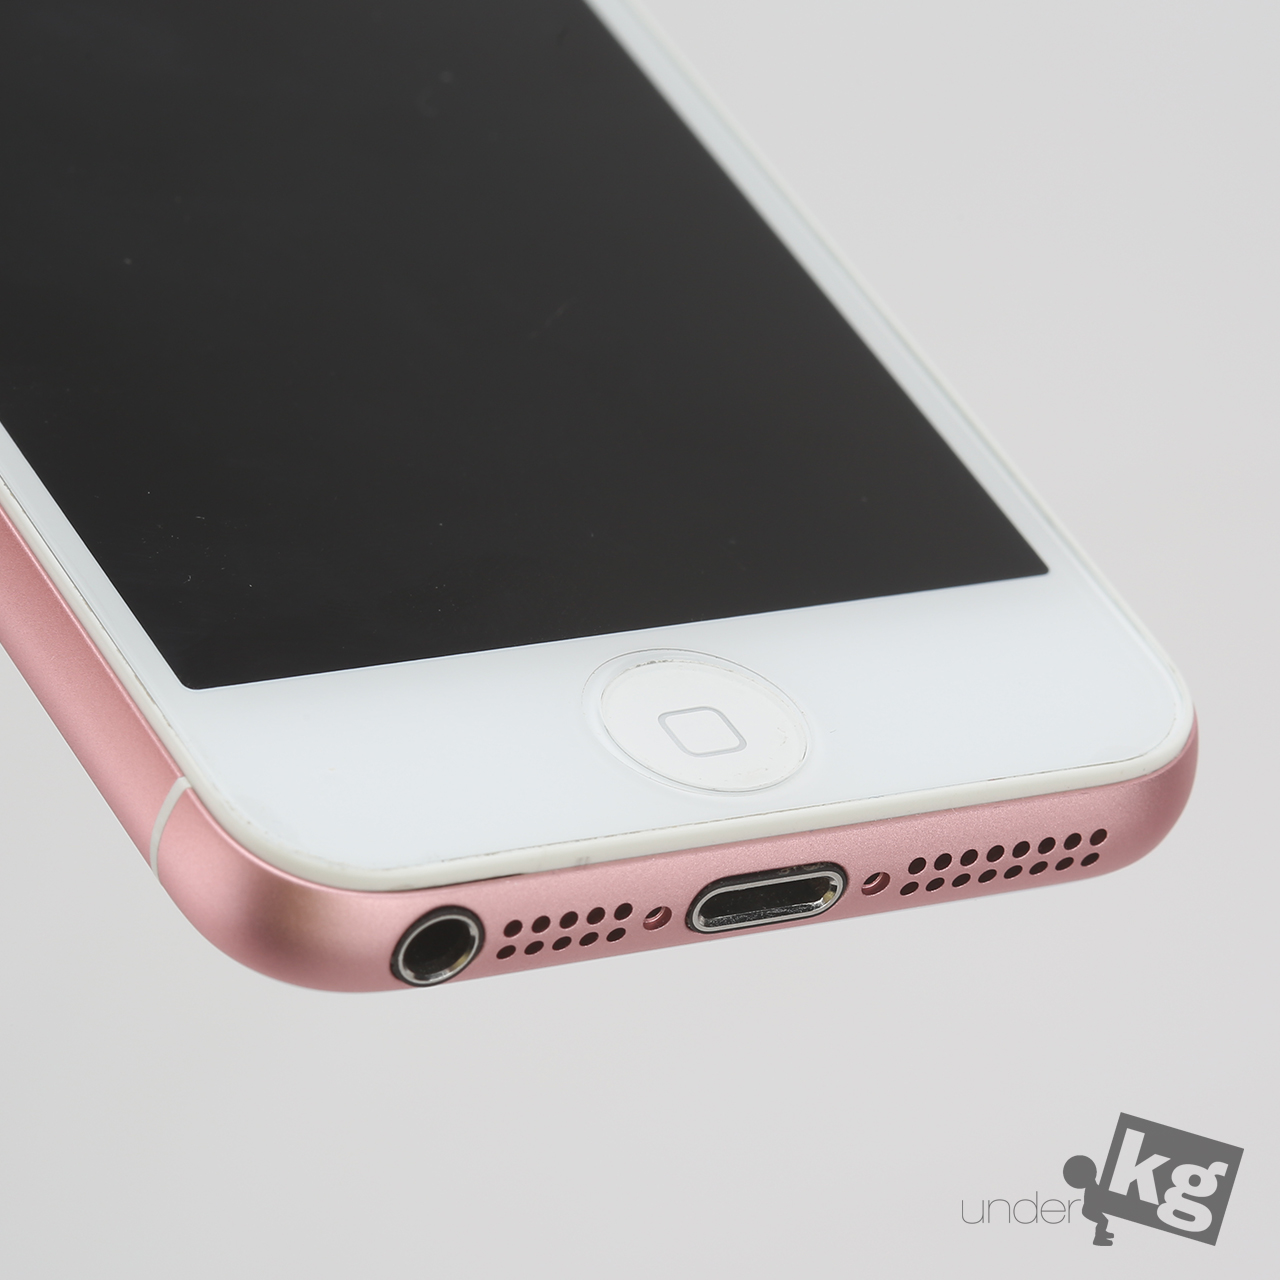 iphone5-to-iphone6-housing-change-pic6.jpg